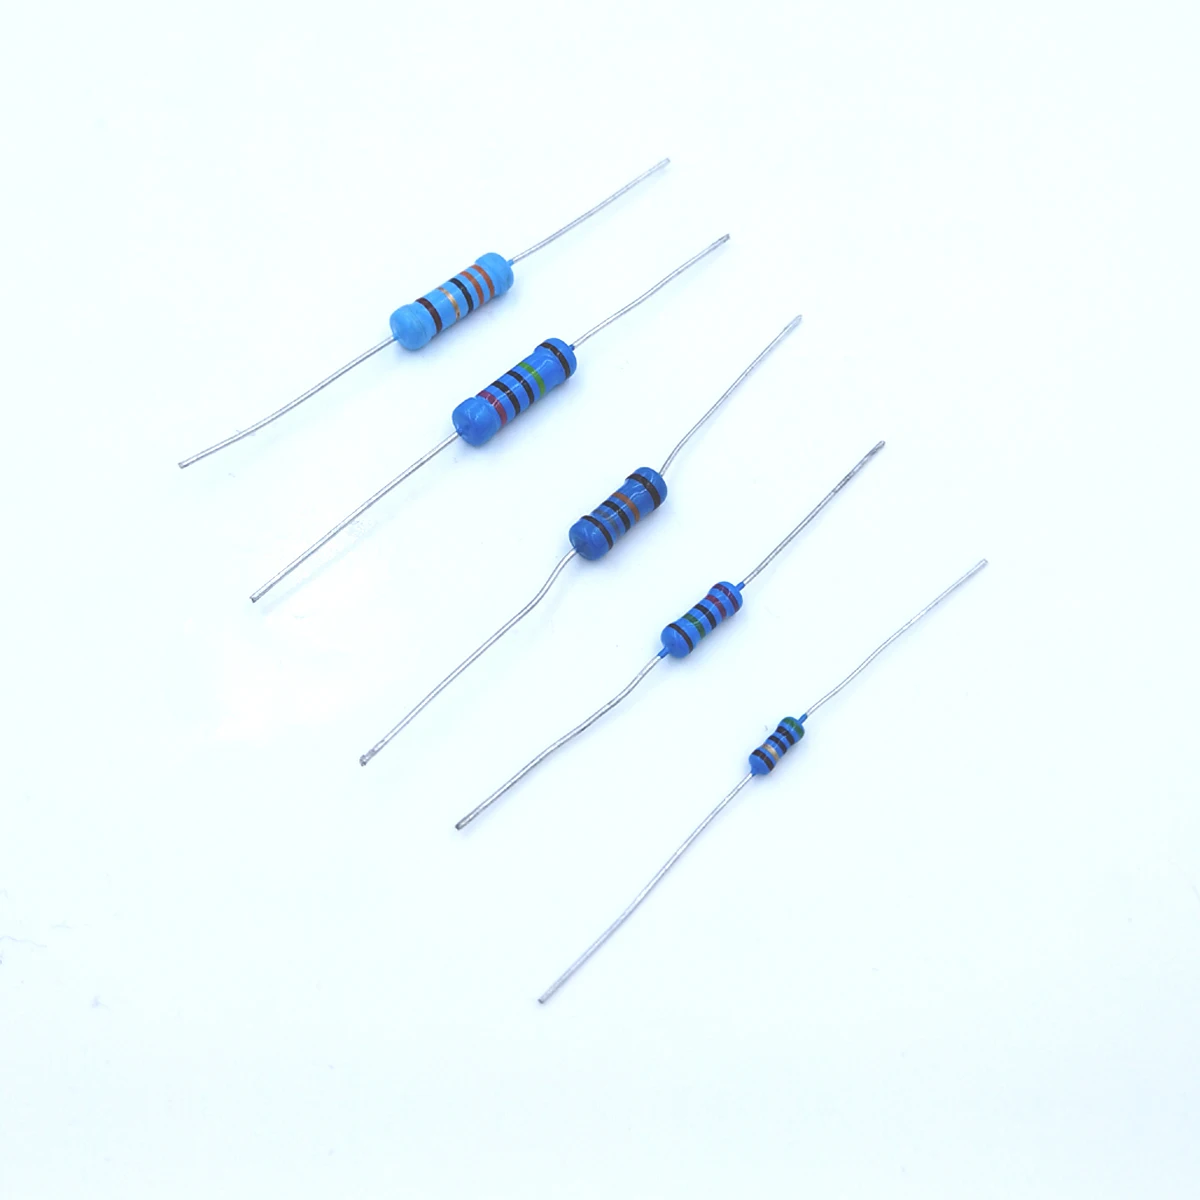 100Pcs 56K 62K 68K 75K 82K 91K 100K 120K 150K 180K 200K 220K 240K R Ohm 16W 18W 1 Metal Film Resistor Colored ring Resistance